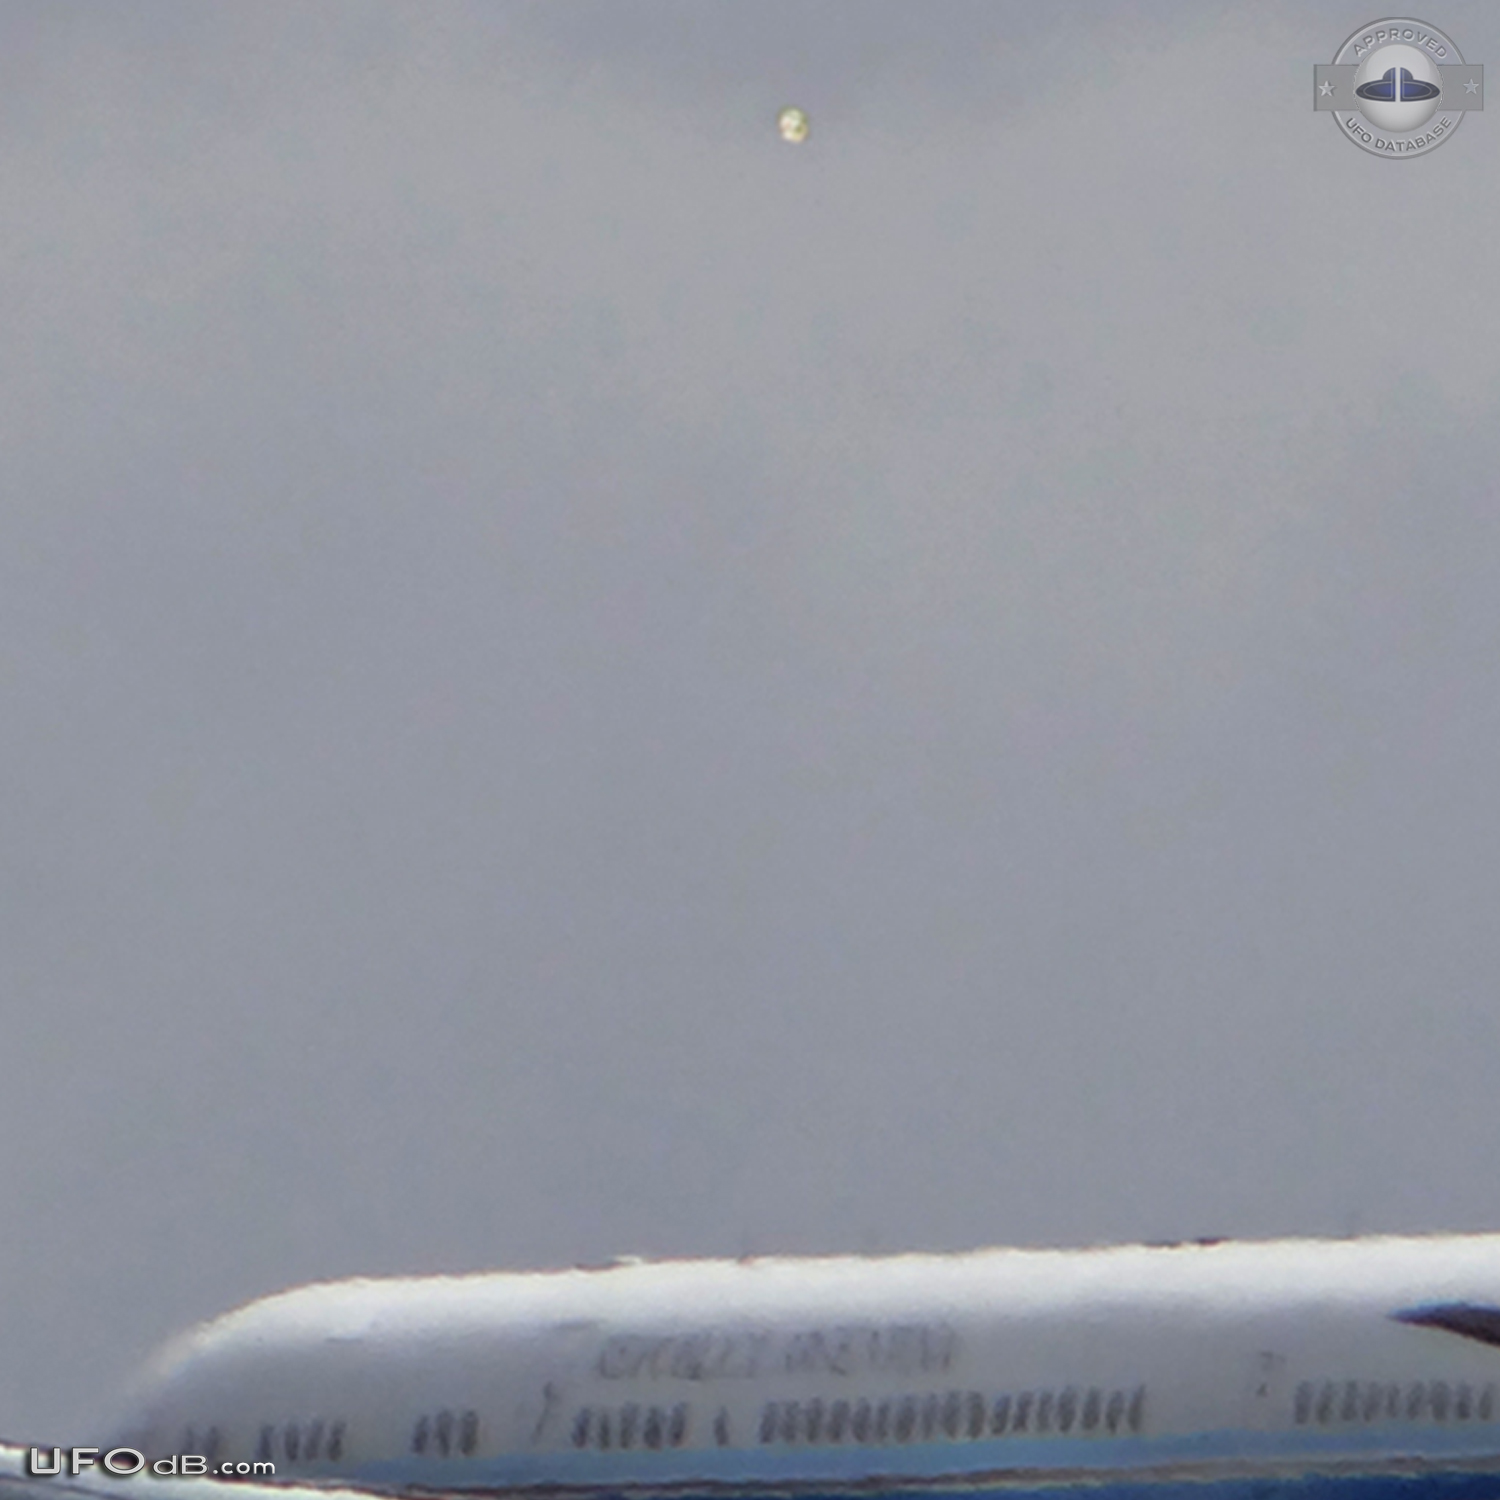 Two UFOs near Tango 01 the airplane of the Argentina president in 2012 UFO Picture #574-3